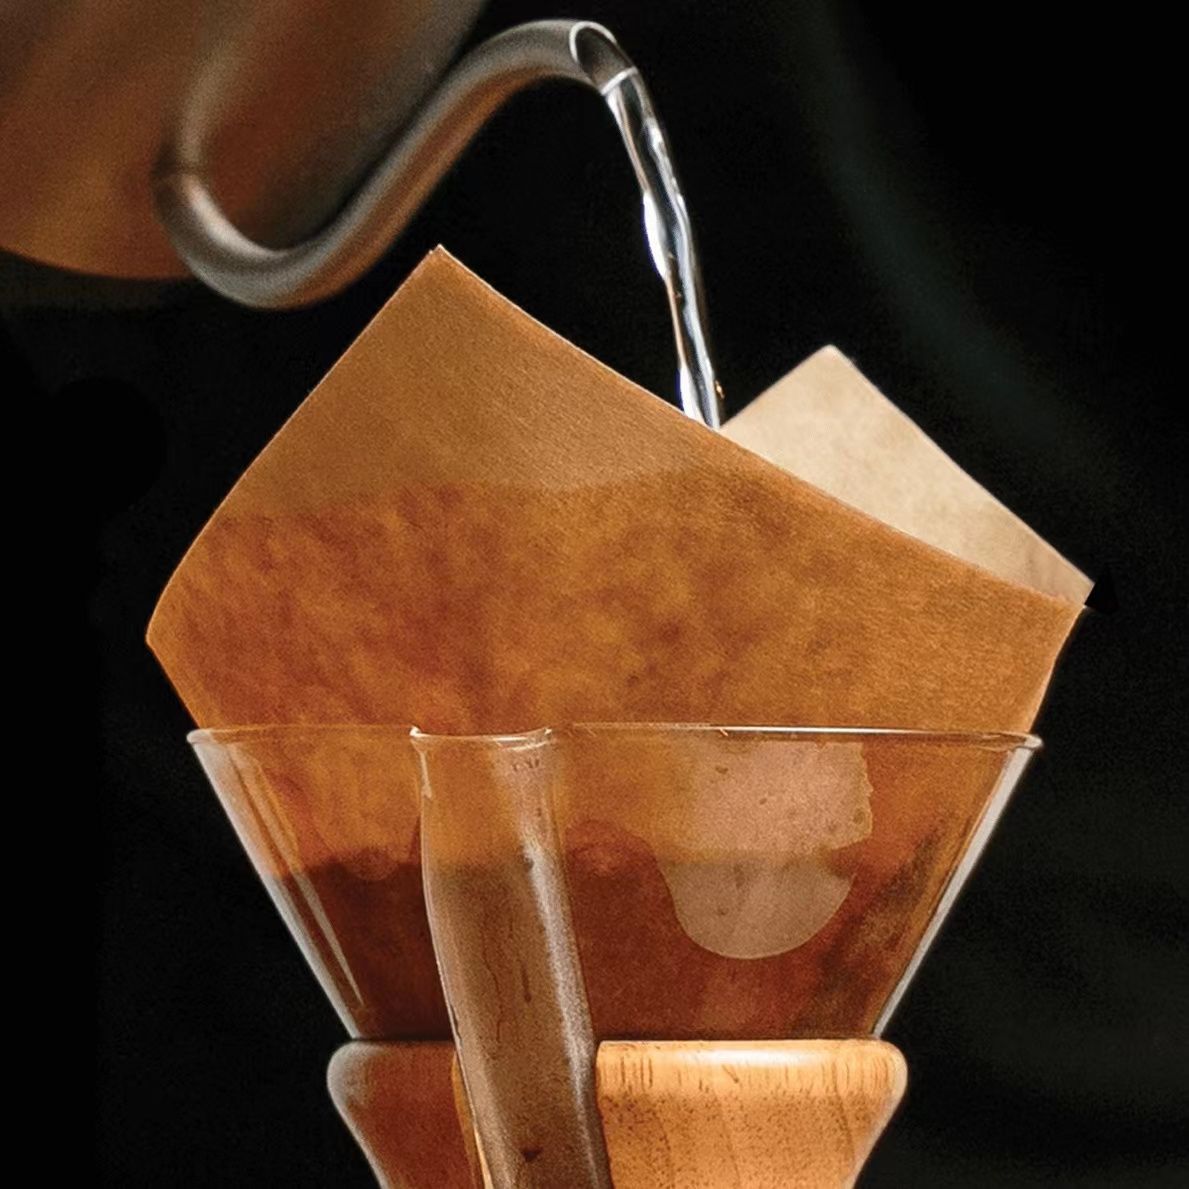 Chemex Unbleached Coffee Filter Squares (100-Pack)